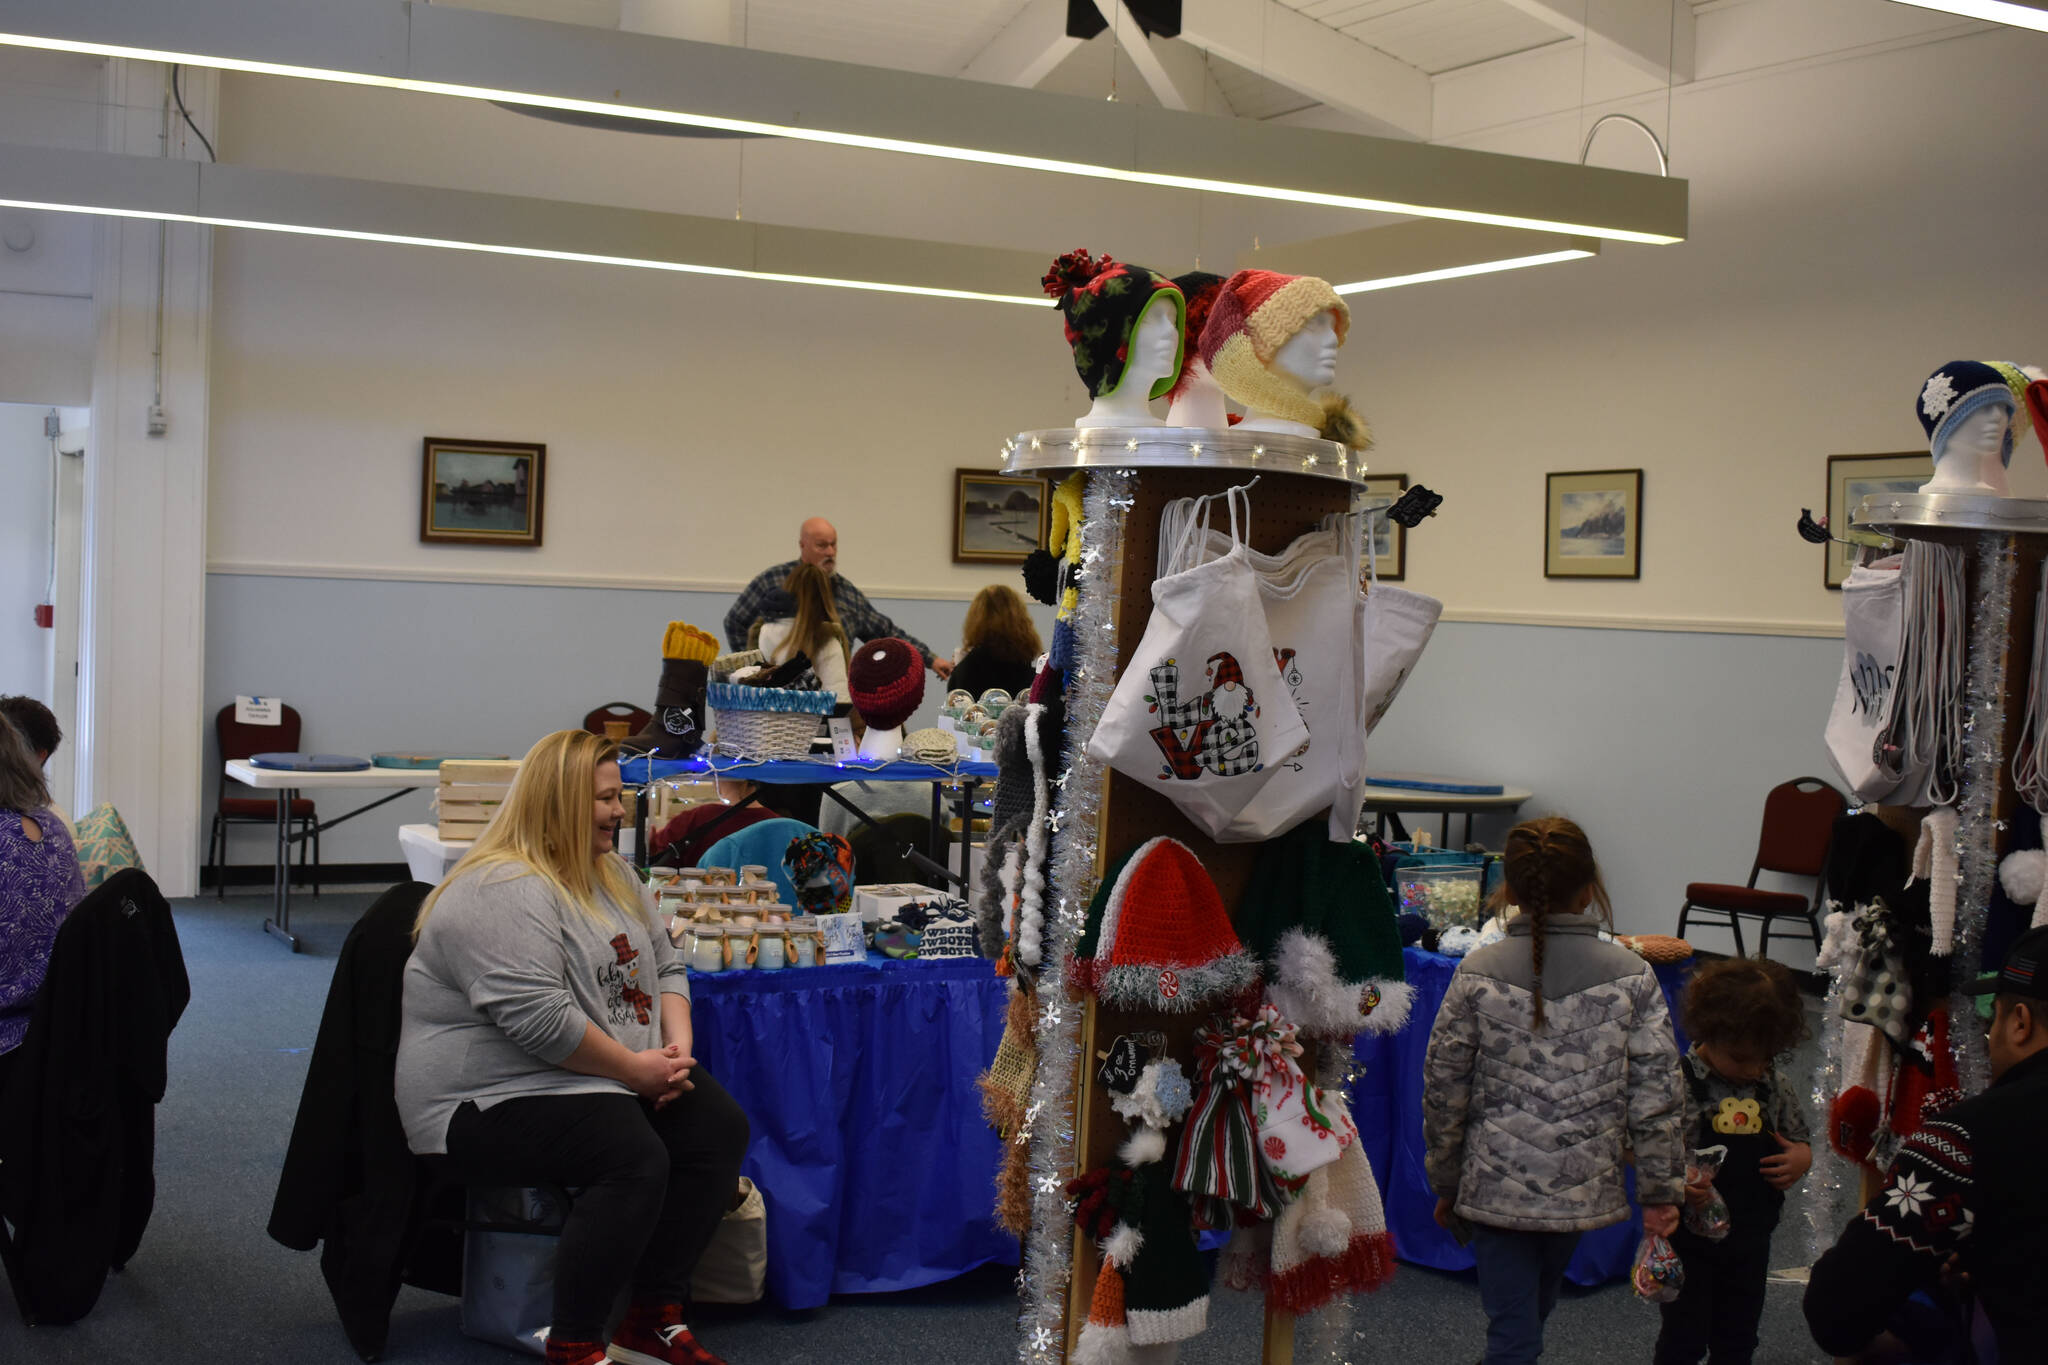 Local crafters sell their products at a craft fair, part of Christmas Comes to Nikiski festivities on Saturday, Dec. 3, 2022, at Nikiski Community Recreation Center in Nikiski, Alaska. (Jake Dye/Peninsula Clarion)